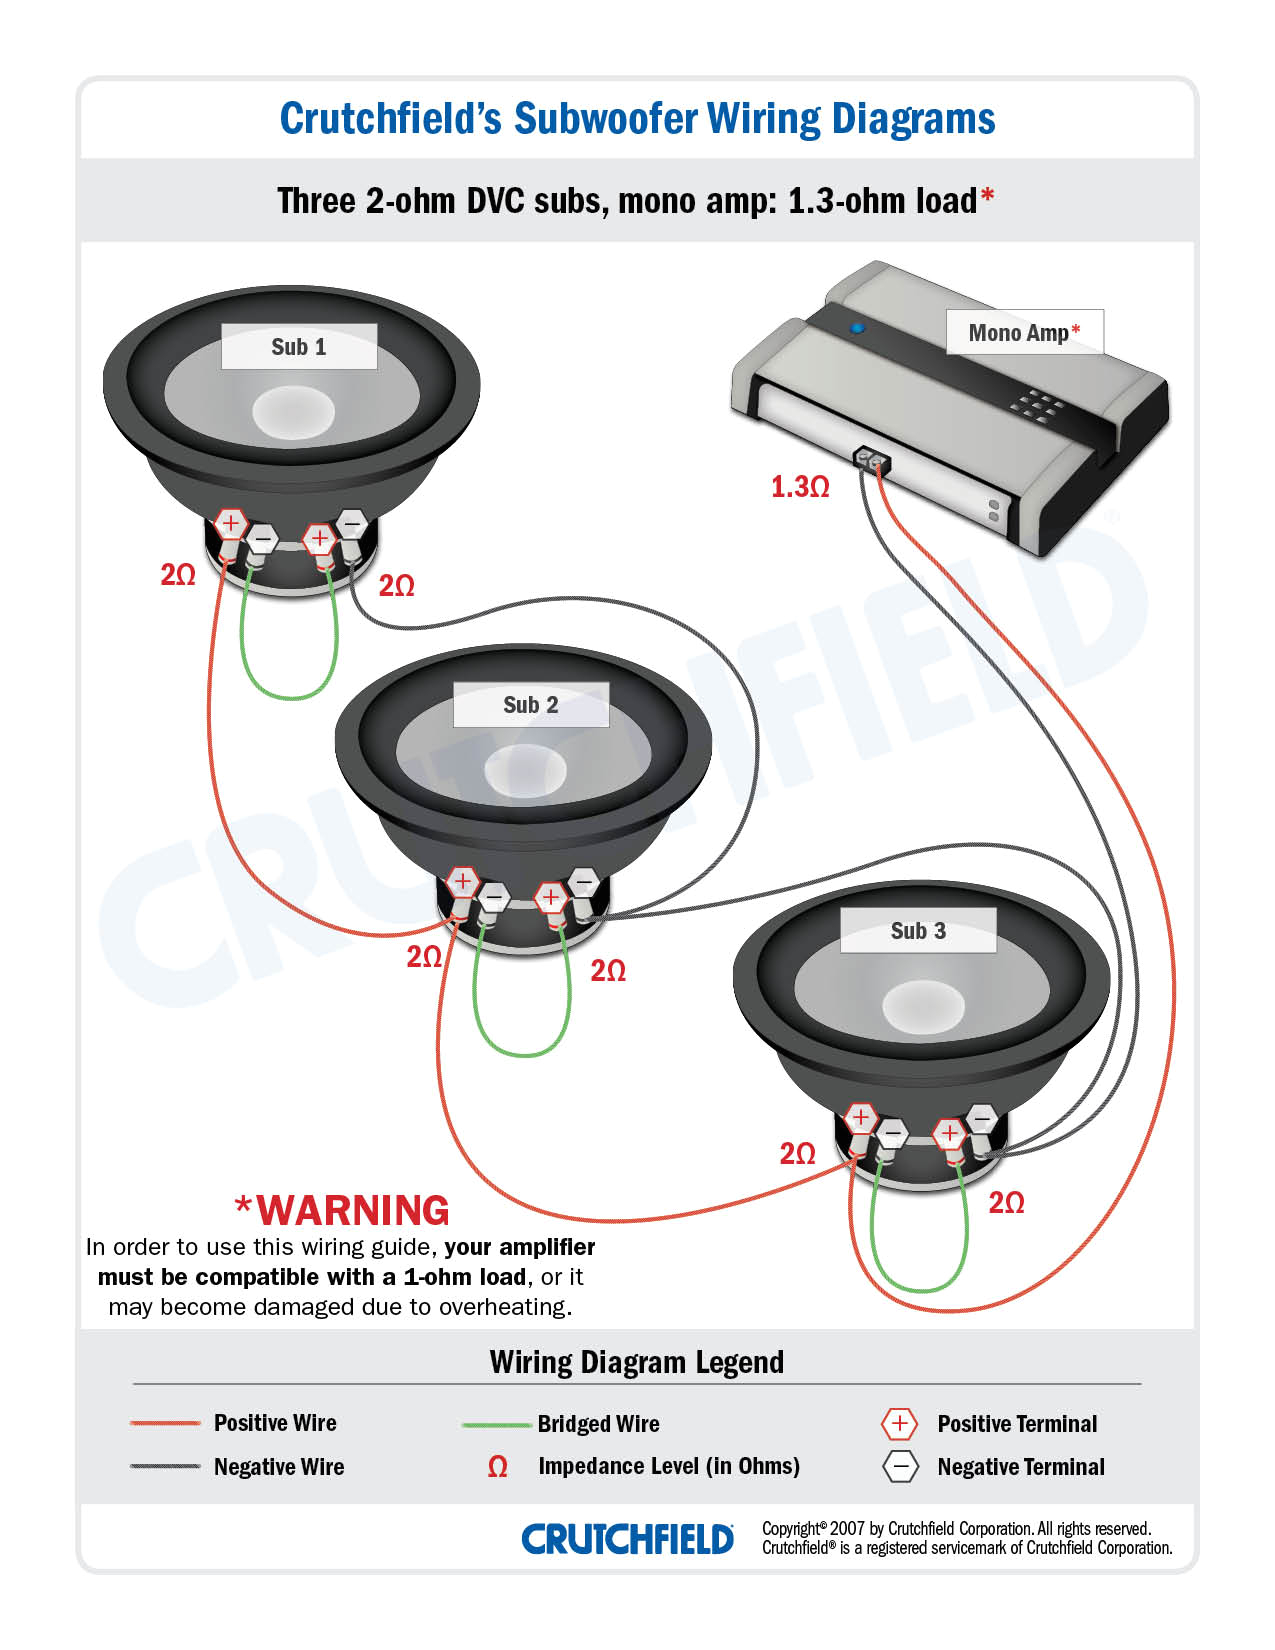 ron three dvc 2 ohm subs get wired to a mono amp capable of driving a 1 ohm load